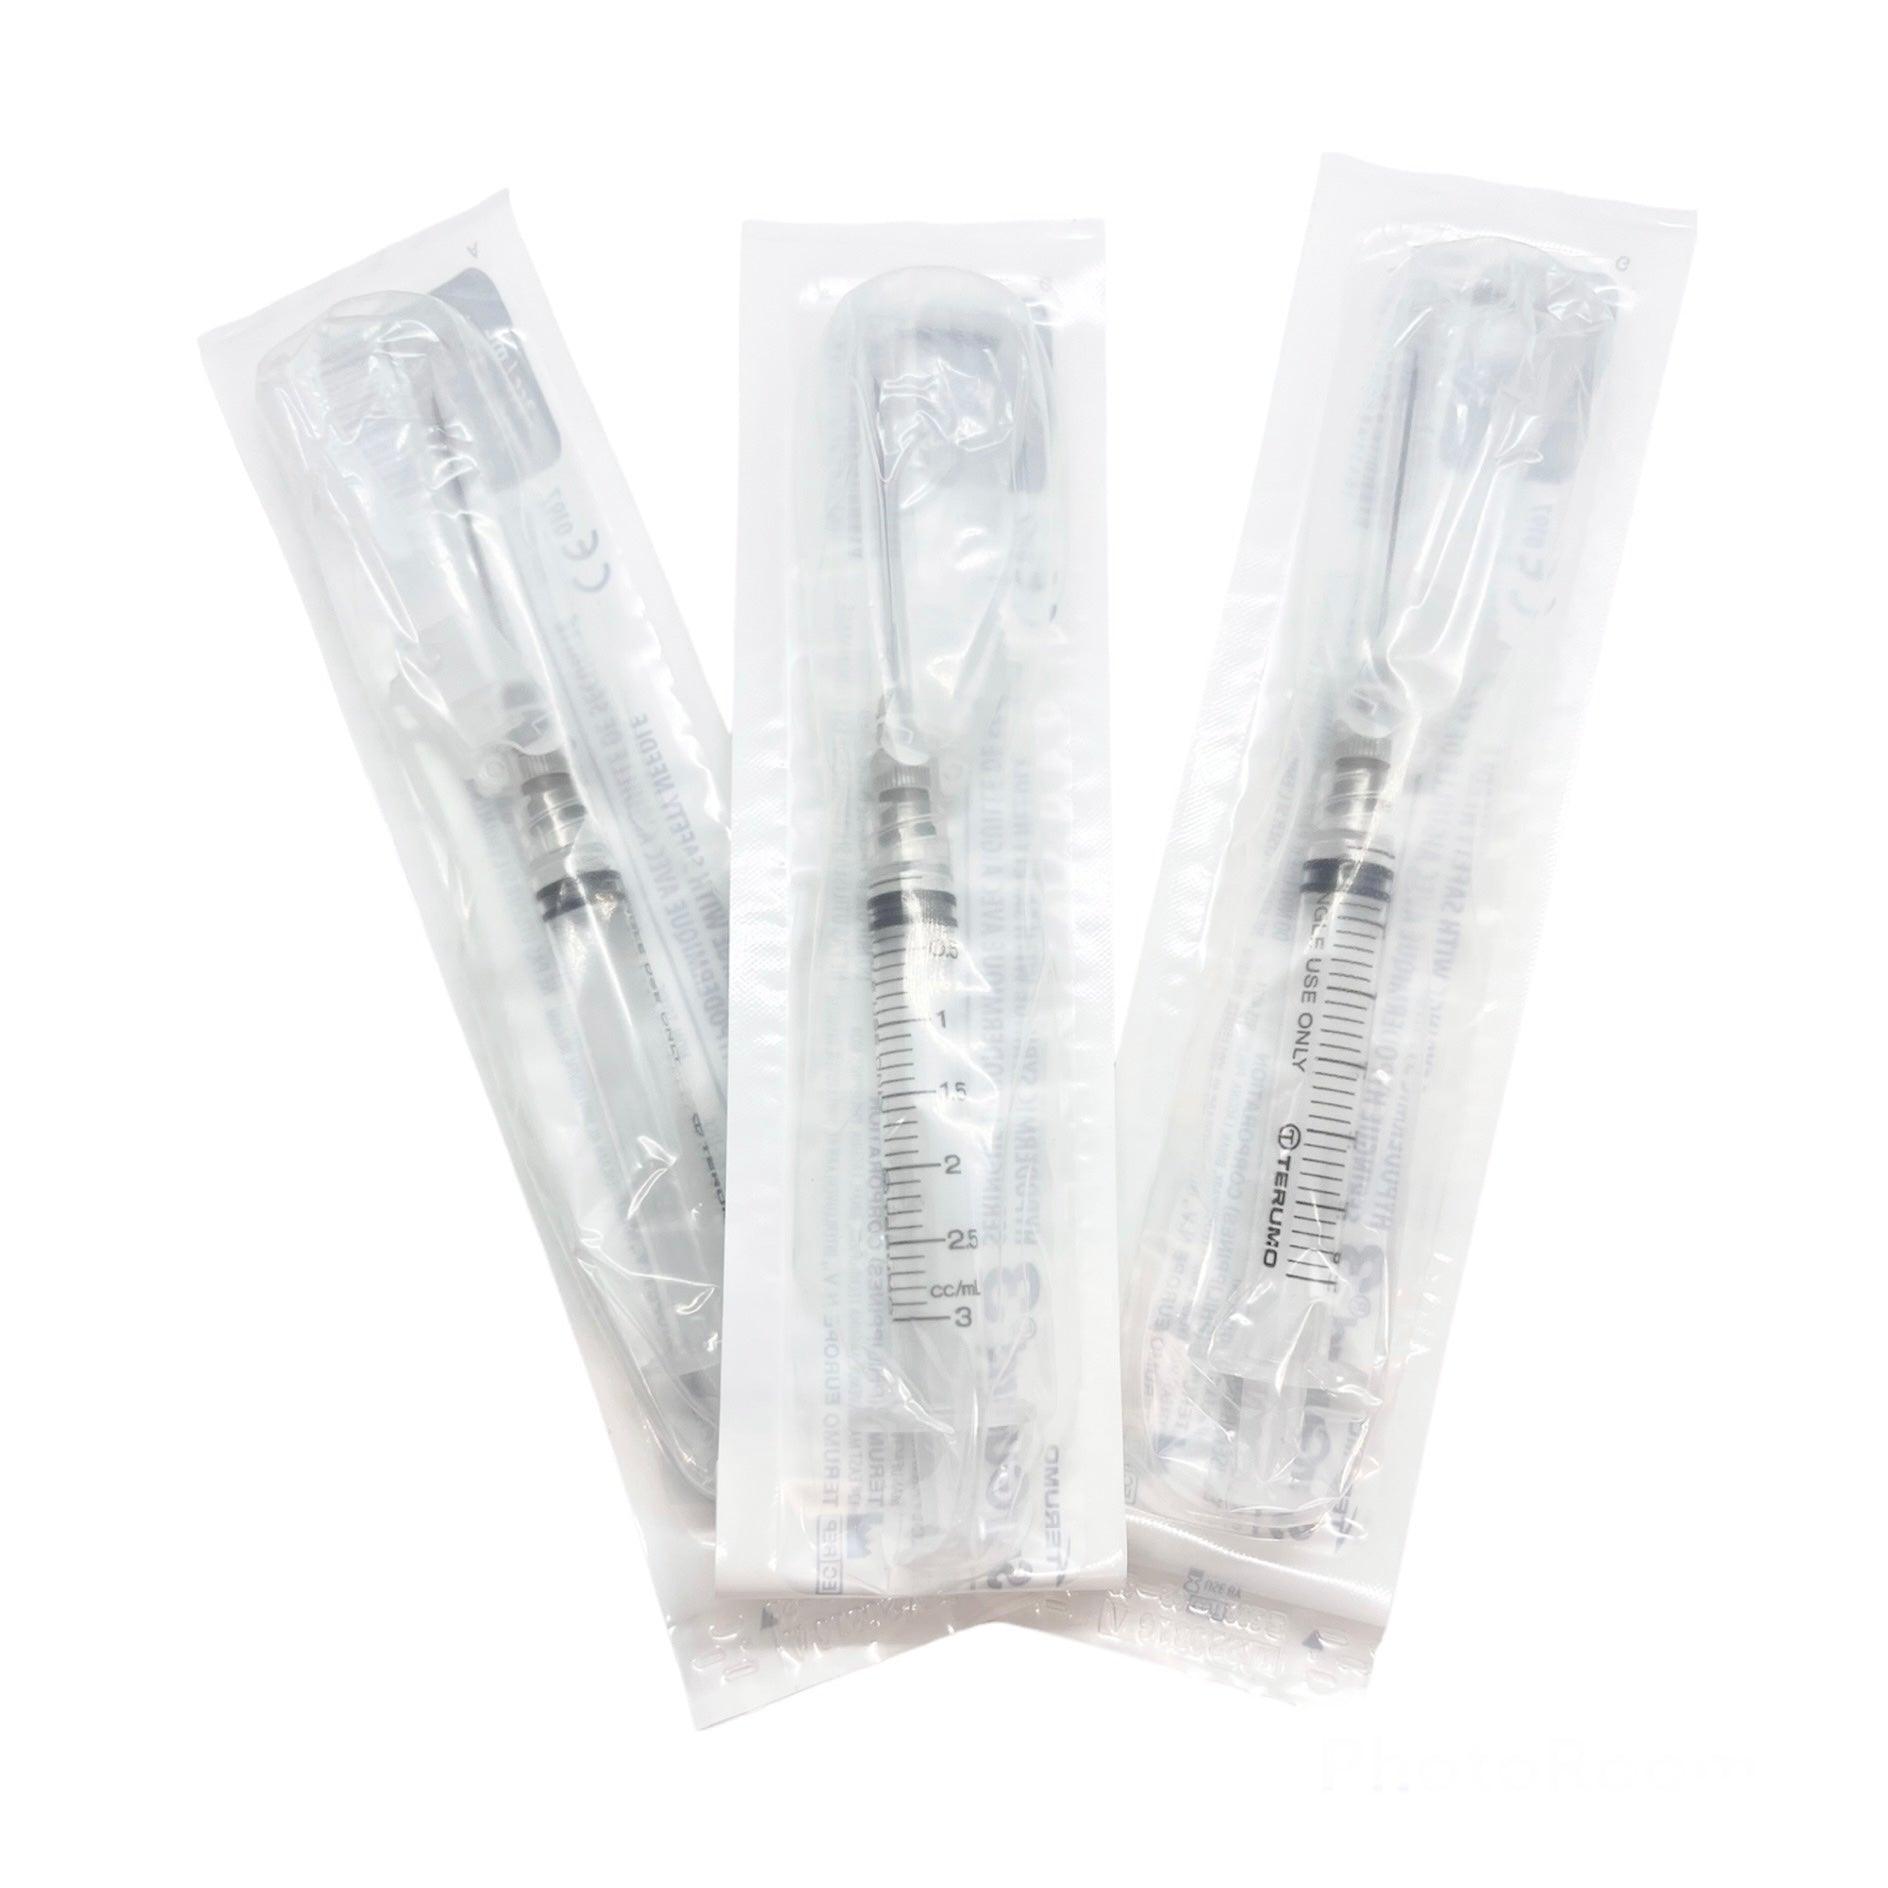 3 mL | 22G x 1 1/2" - Terumo SG3-03L2238 Hypodermic Syringes with Safety Needle | SurGuard 3 | 100 per Box